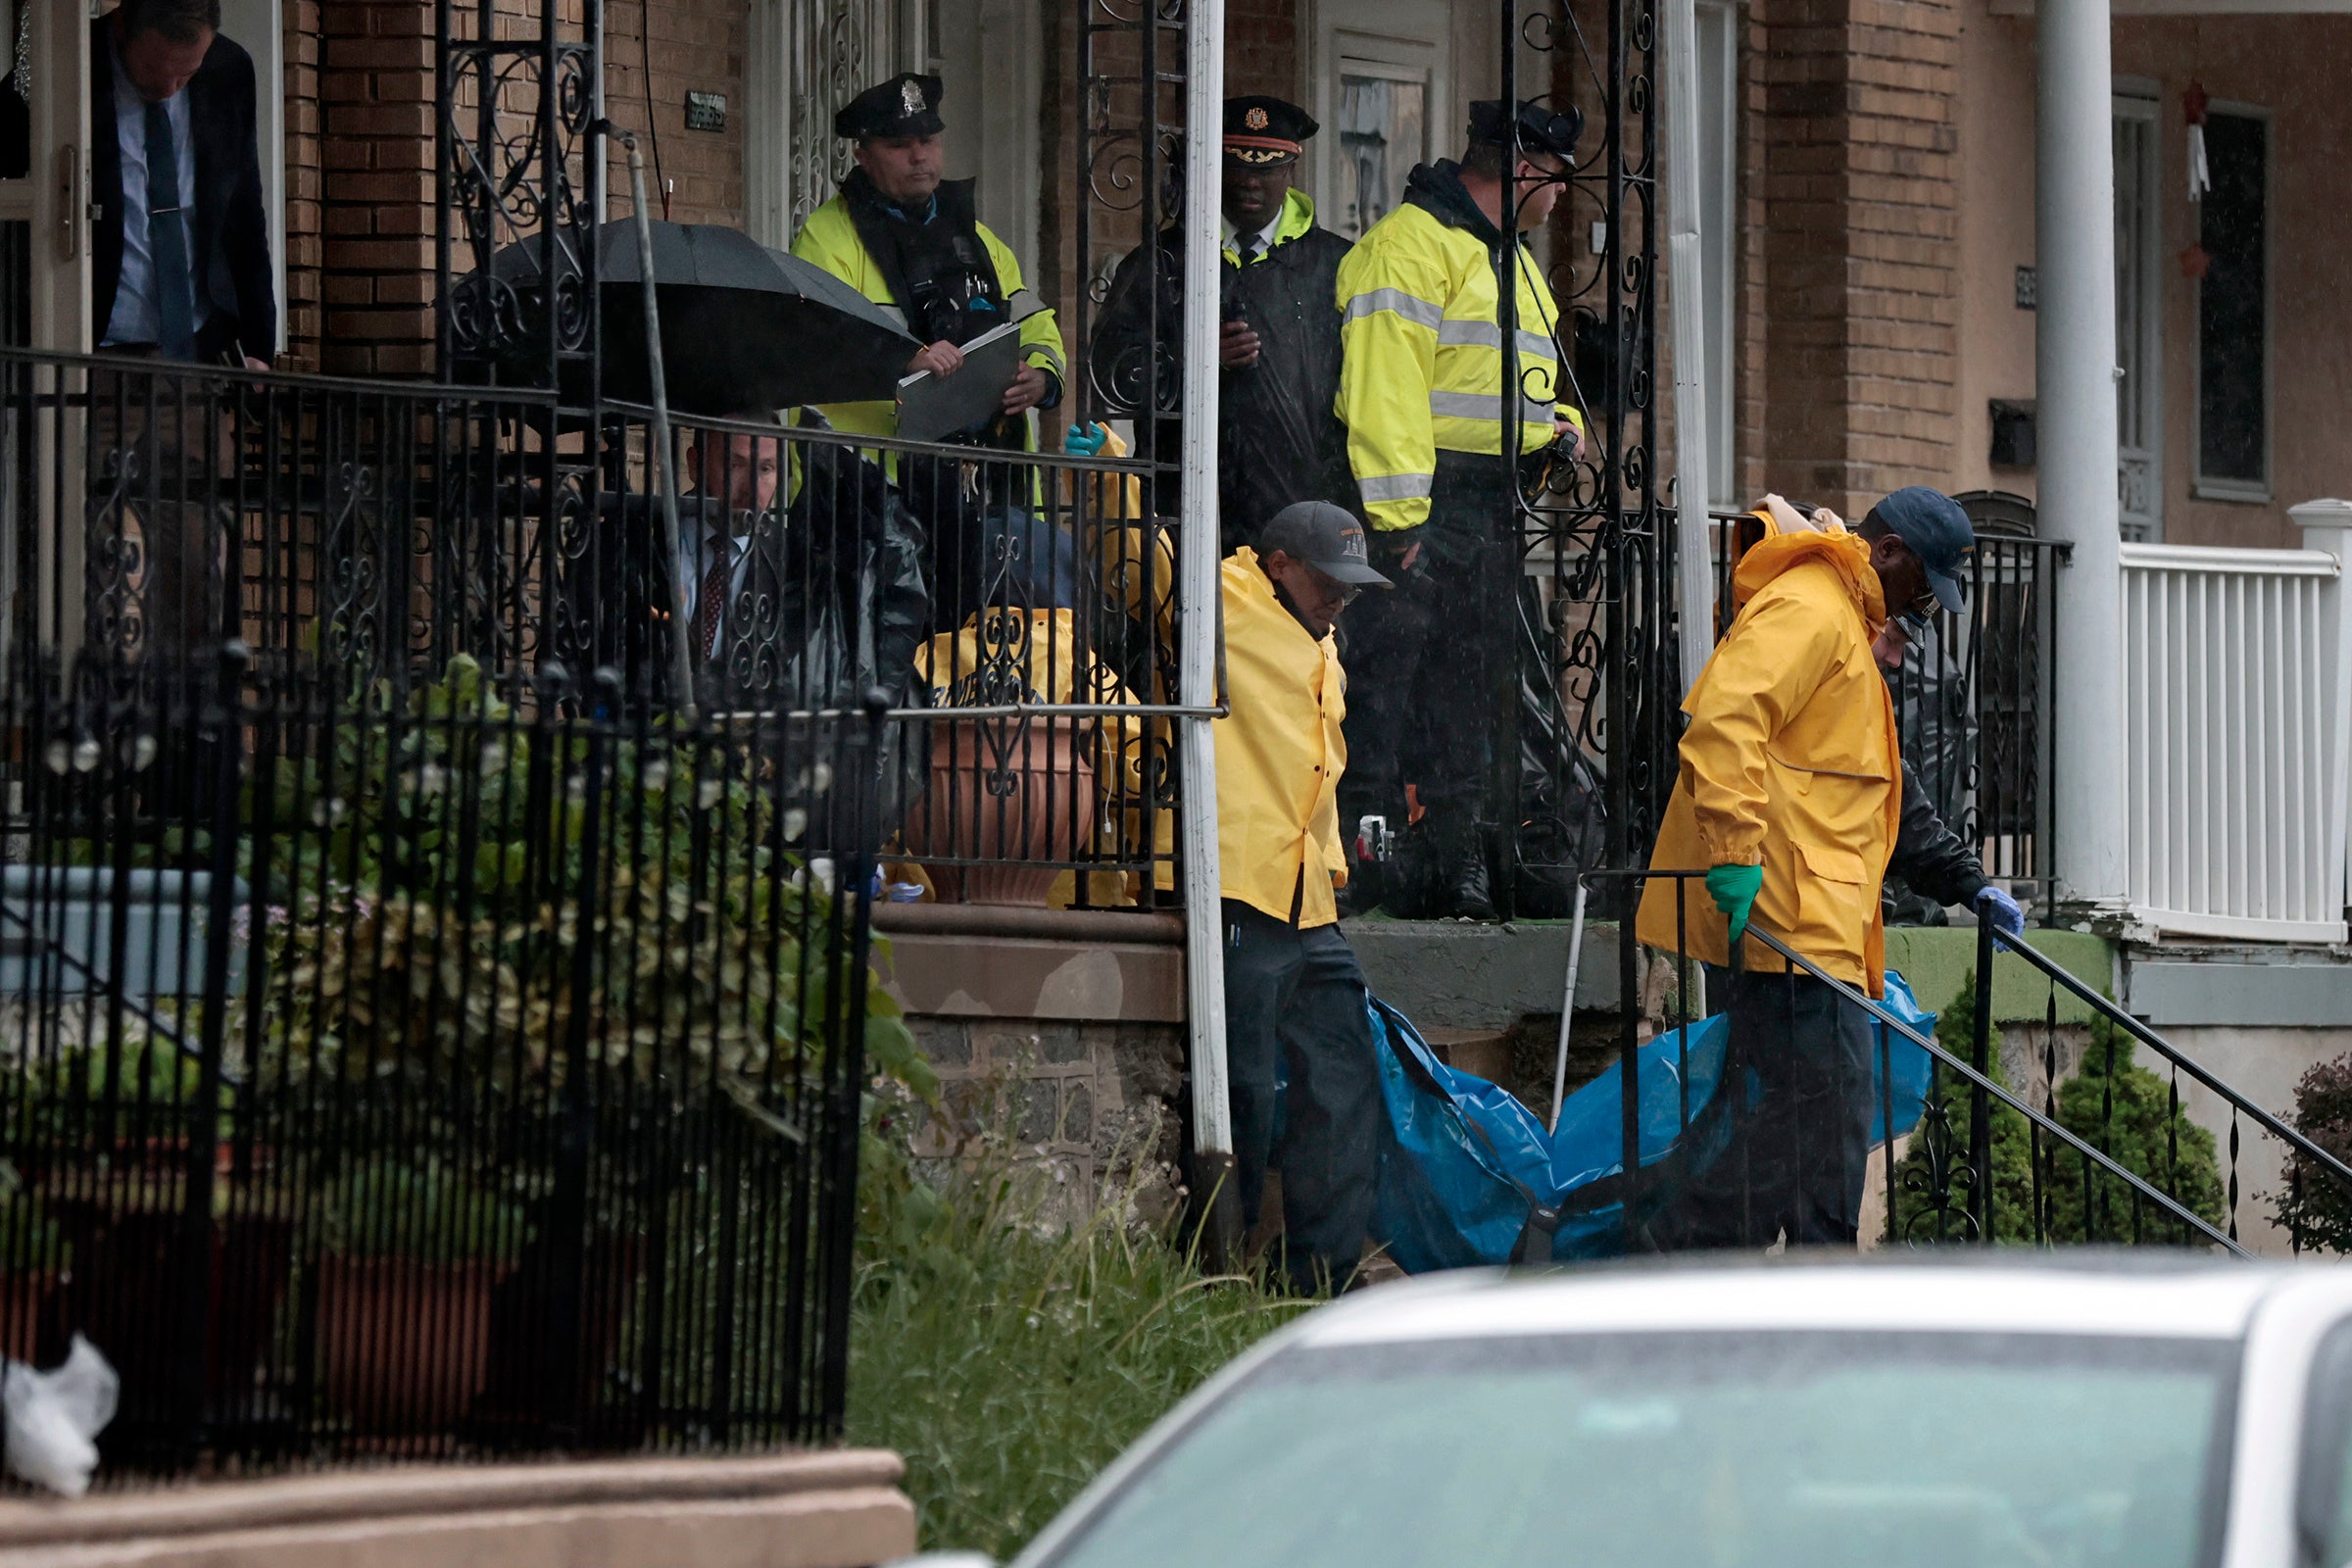 A body is removed as police investigate the scene of a quadruple shooting on the 5900 block of Palmetto Street in Philadelphia’s Crescentville section on Friday